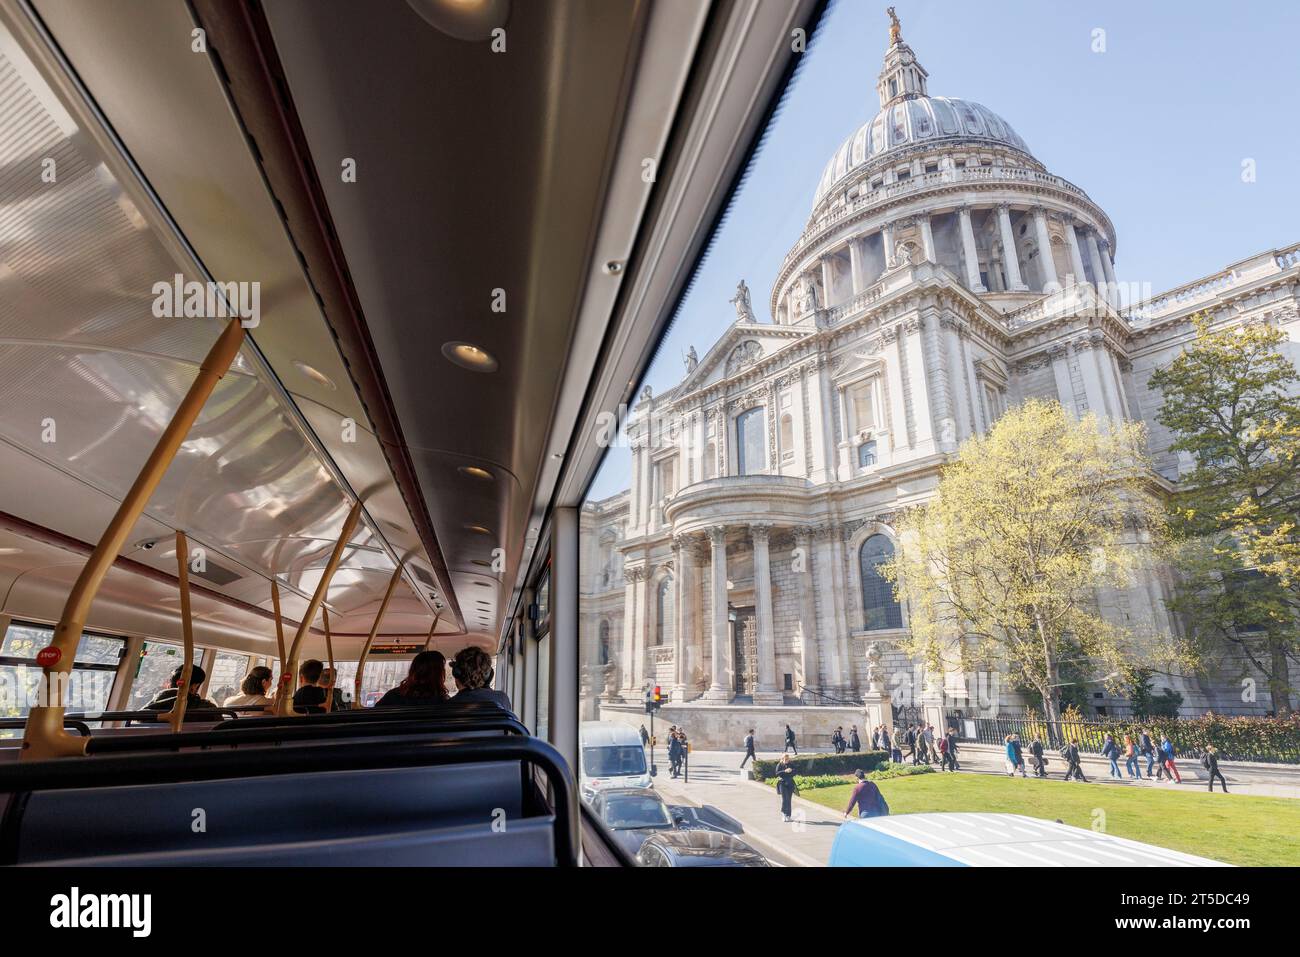 Sadiq Khan to axe landmark bus route 11 a week before Coronation.   Pictured: The view of St. Paul’s Cathedral from the side windows of a Bus 11 passi Stock Photo